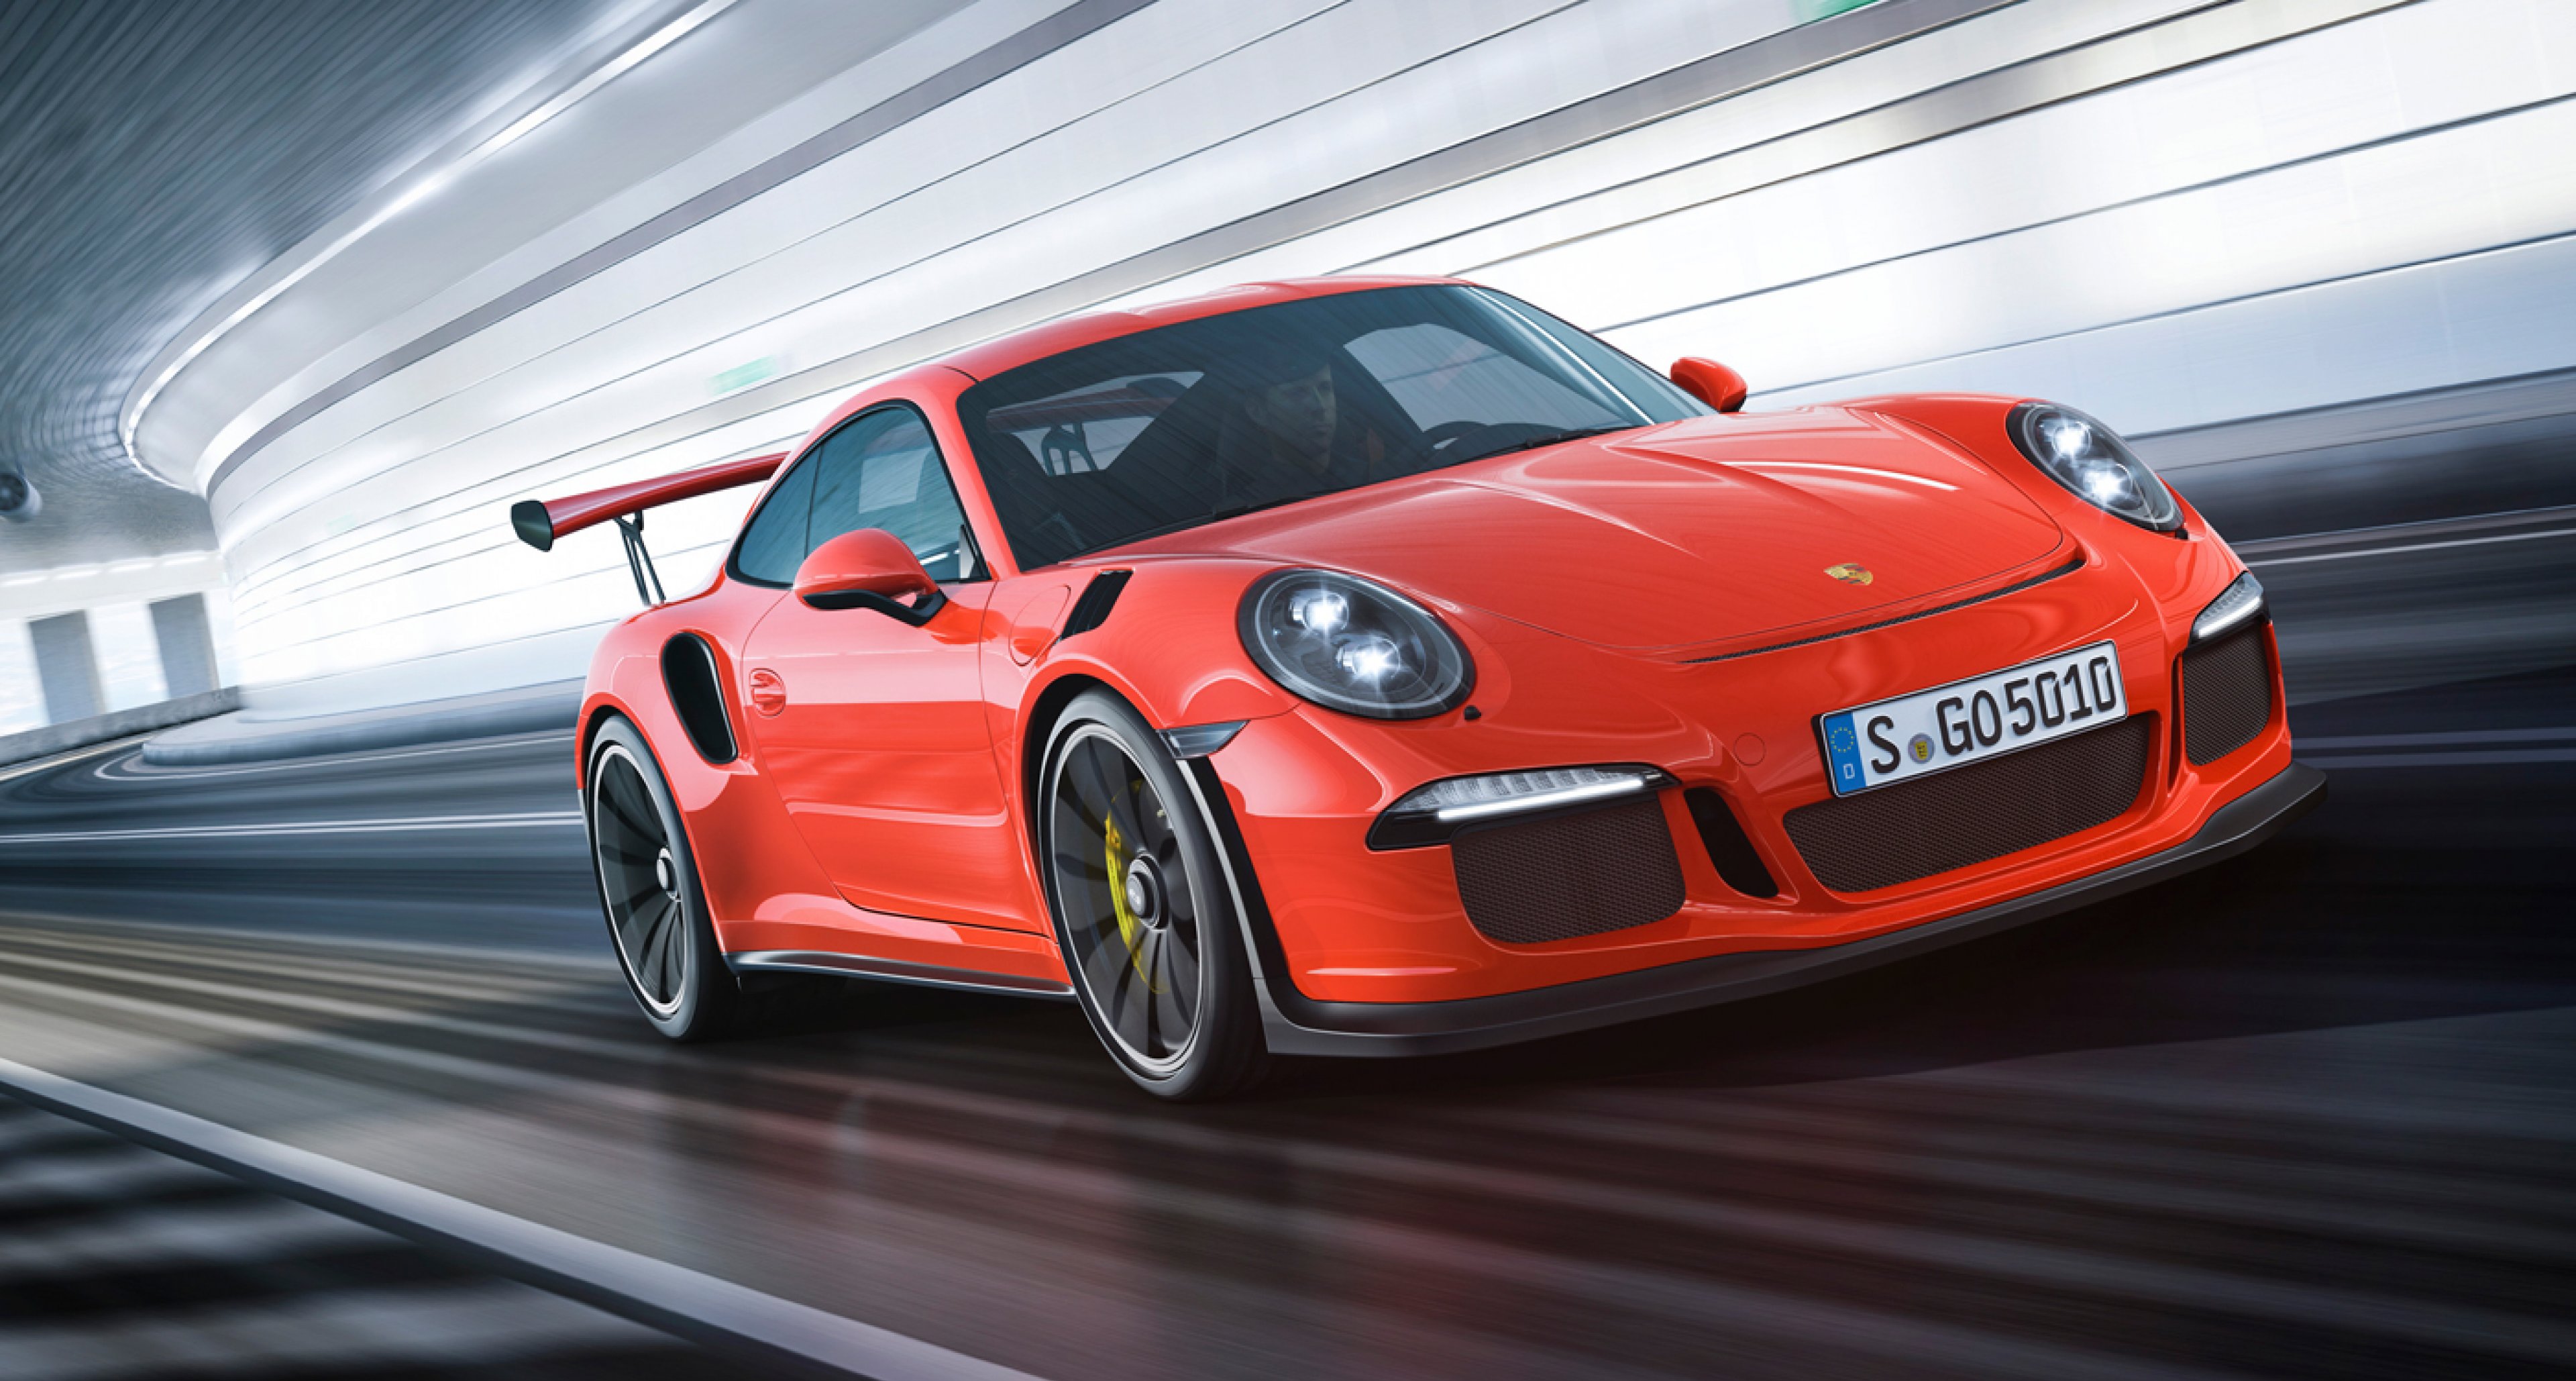 The New Porsche 911 Gt3 Rs Is Faster Than The Carrera Gt